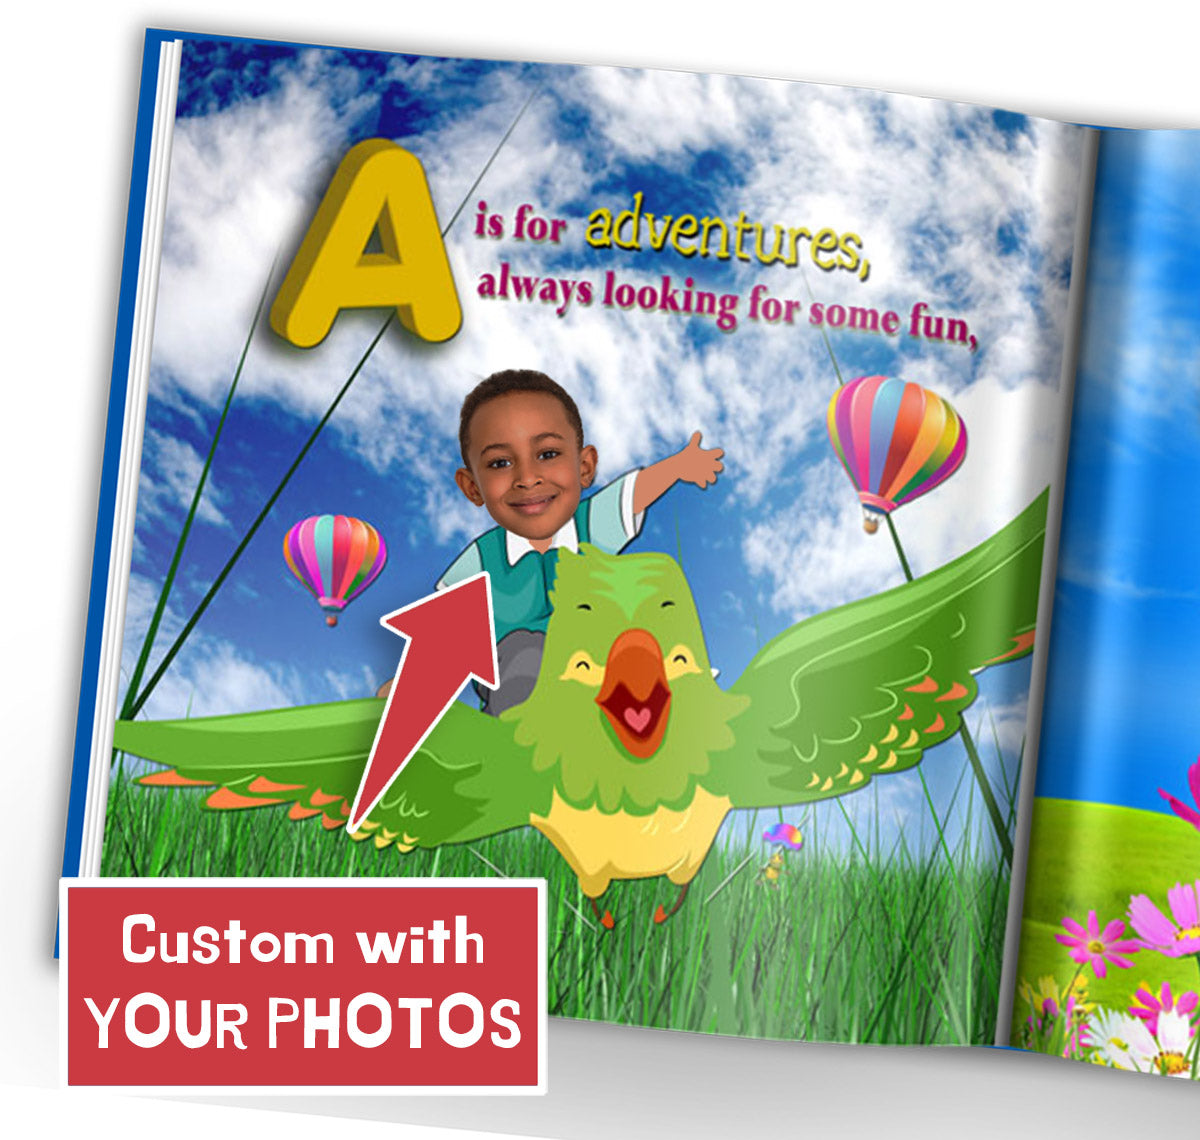 Personalized childrens abc storybook preview, custom books for kids, abc book with custom photos starring your child